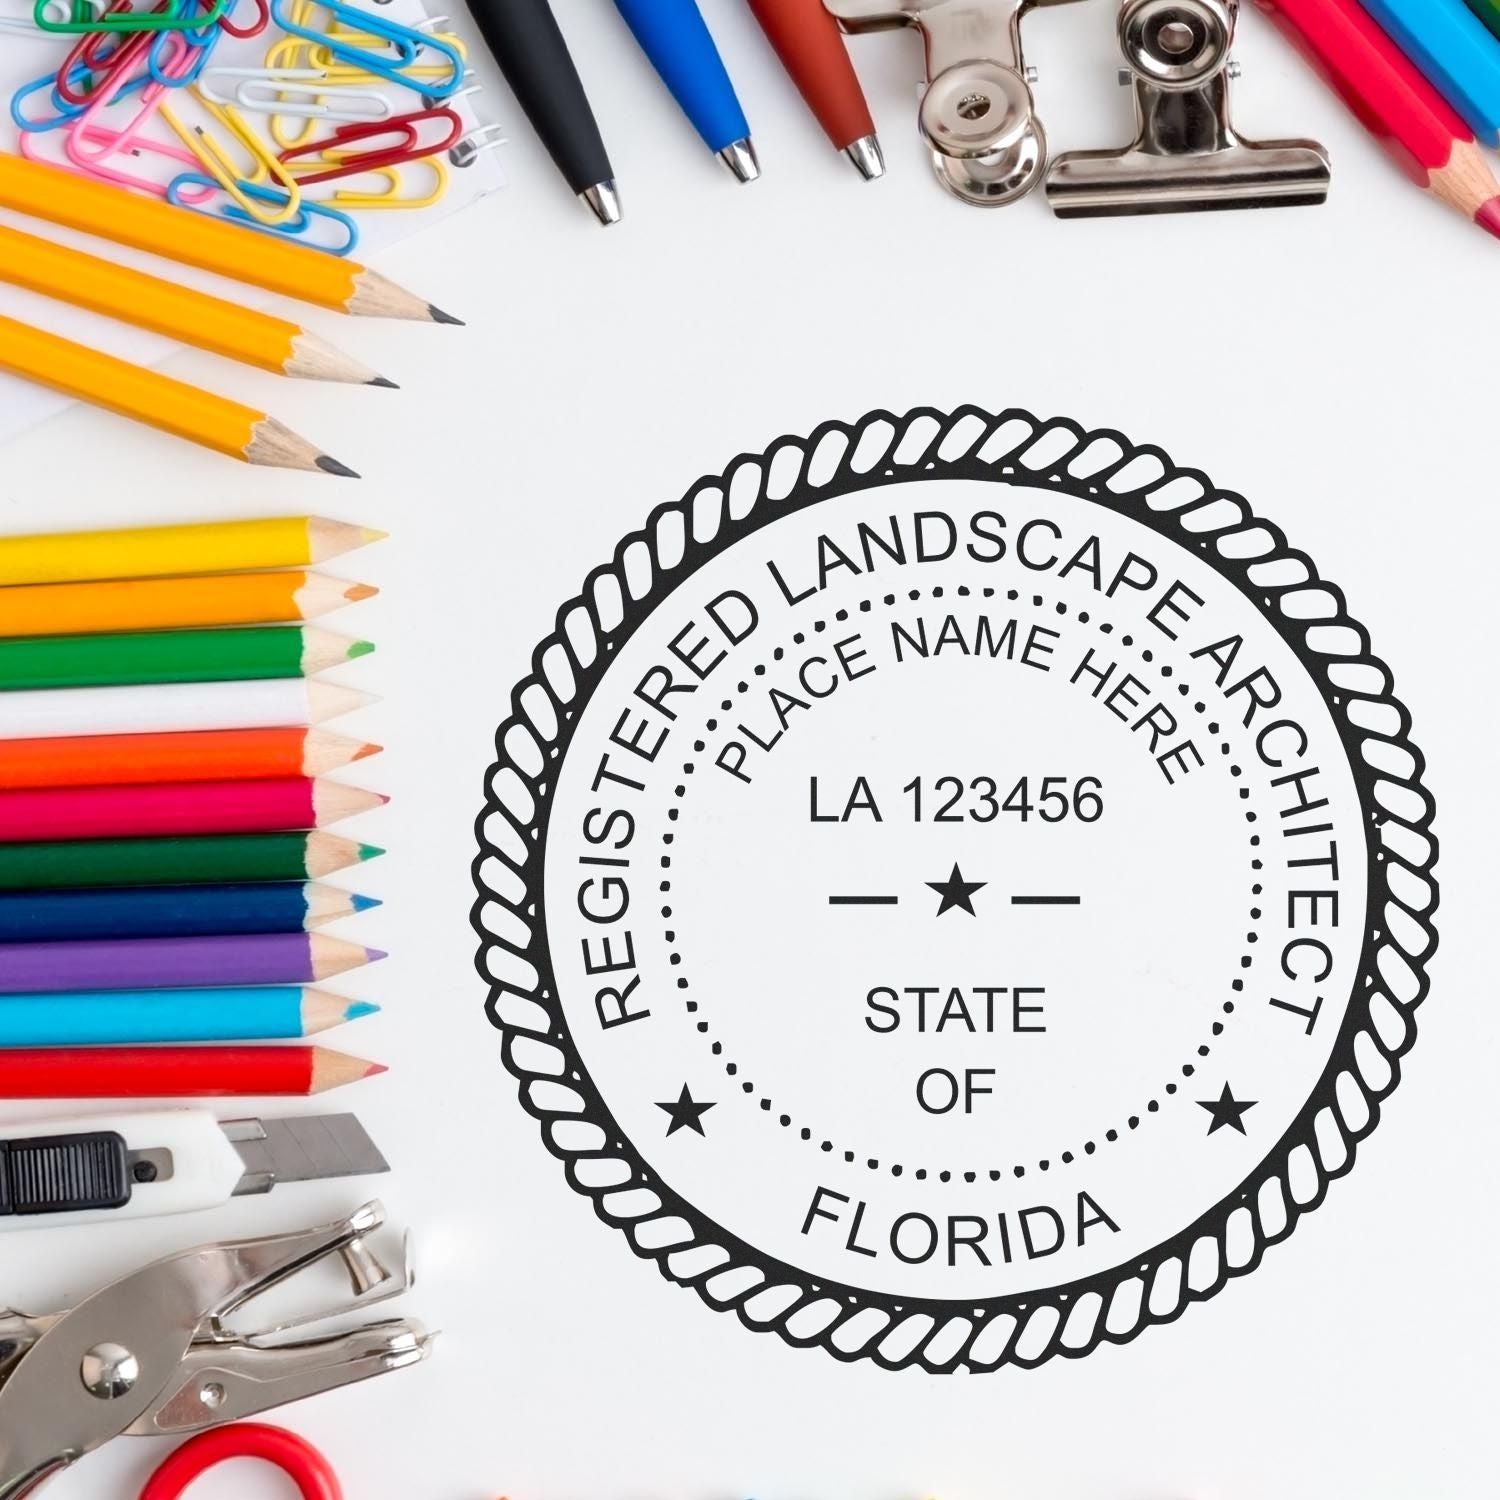 This paper is stamped with a sample imprint of the Premium MaxLight Pre-Inked Florida Landscape Architectural Stamp, signifying its quality and reliability.